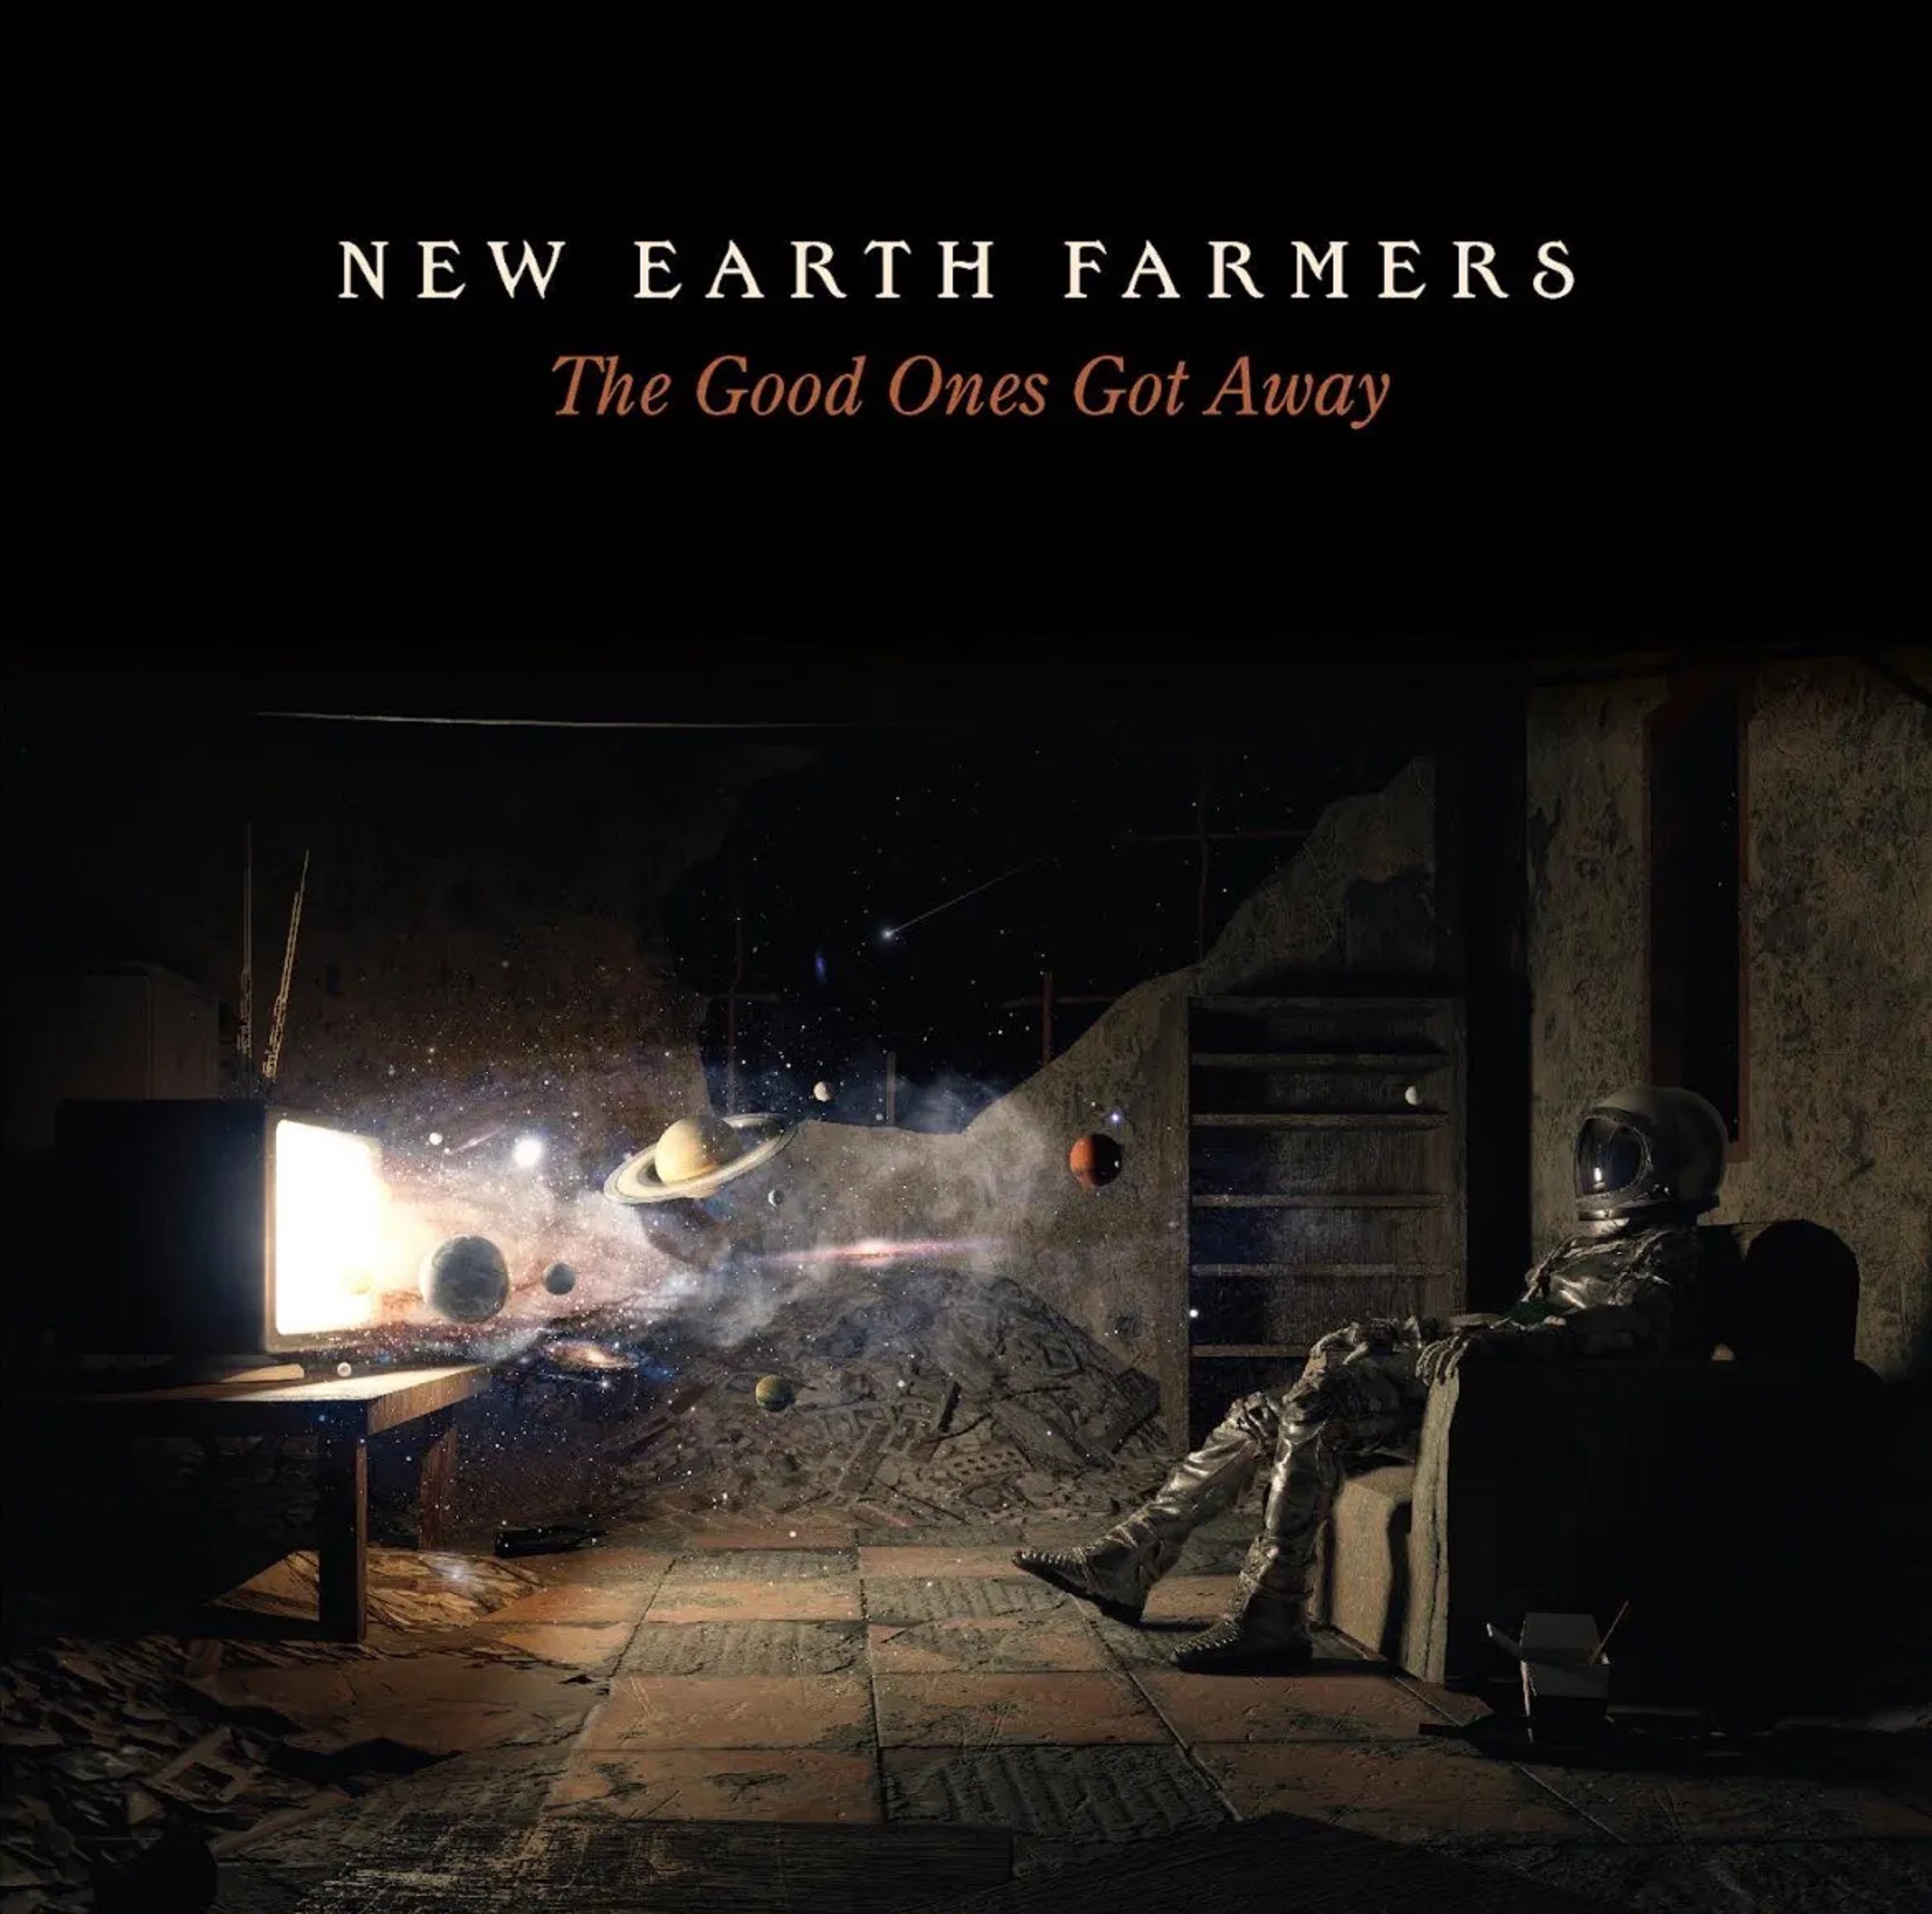 NEW EARTH FARMERS TO RELEASE THE GOOD ONES GOT AWAY